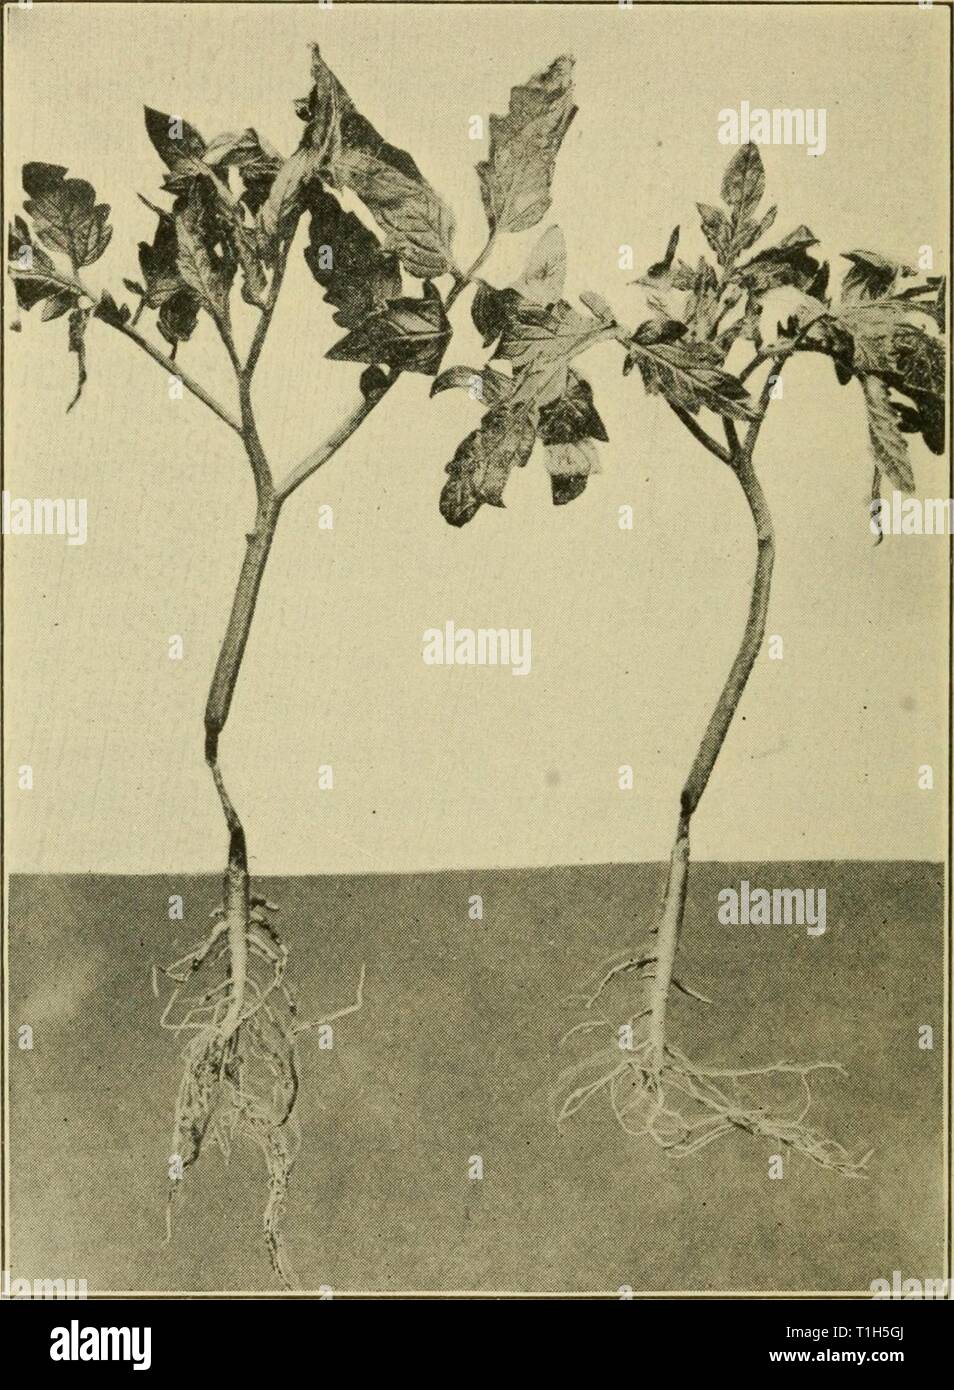 Diseases of economic plants (1921) Diseases of economic plants  diseasesofeconom01stev Year: 1921  20 Diseases of Economic Plants of fungi, prominent among them being Pythium, Thielavia, Corticium, Fusarium, Botrytis, Sclerotinia, Sclerotium, Phoma, Volutella, Phytophthora, CoUetotrichum, Gloeospo-    FiG. 4. — Stems of young greenhouse tomato plants damped- off frcm attacks of Corticium. After Humbert. rium. The fungus which causes this condition ma} often be seen as a weft of myceHum around the base of the diseased plant, or even creeping over the ground to some distance. Stock Photo